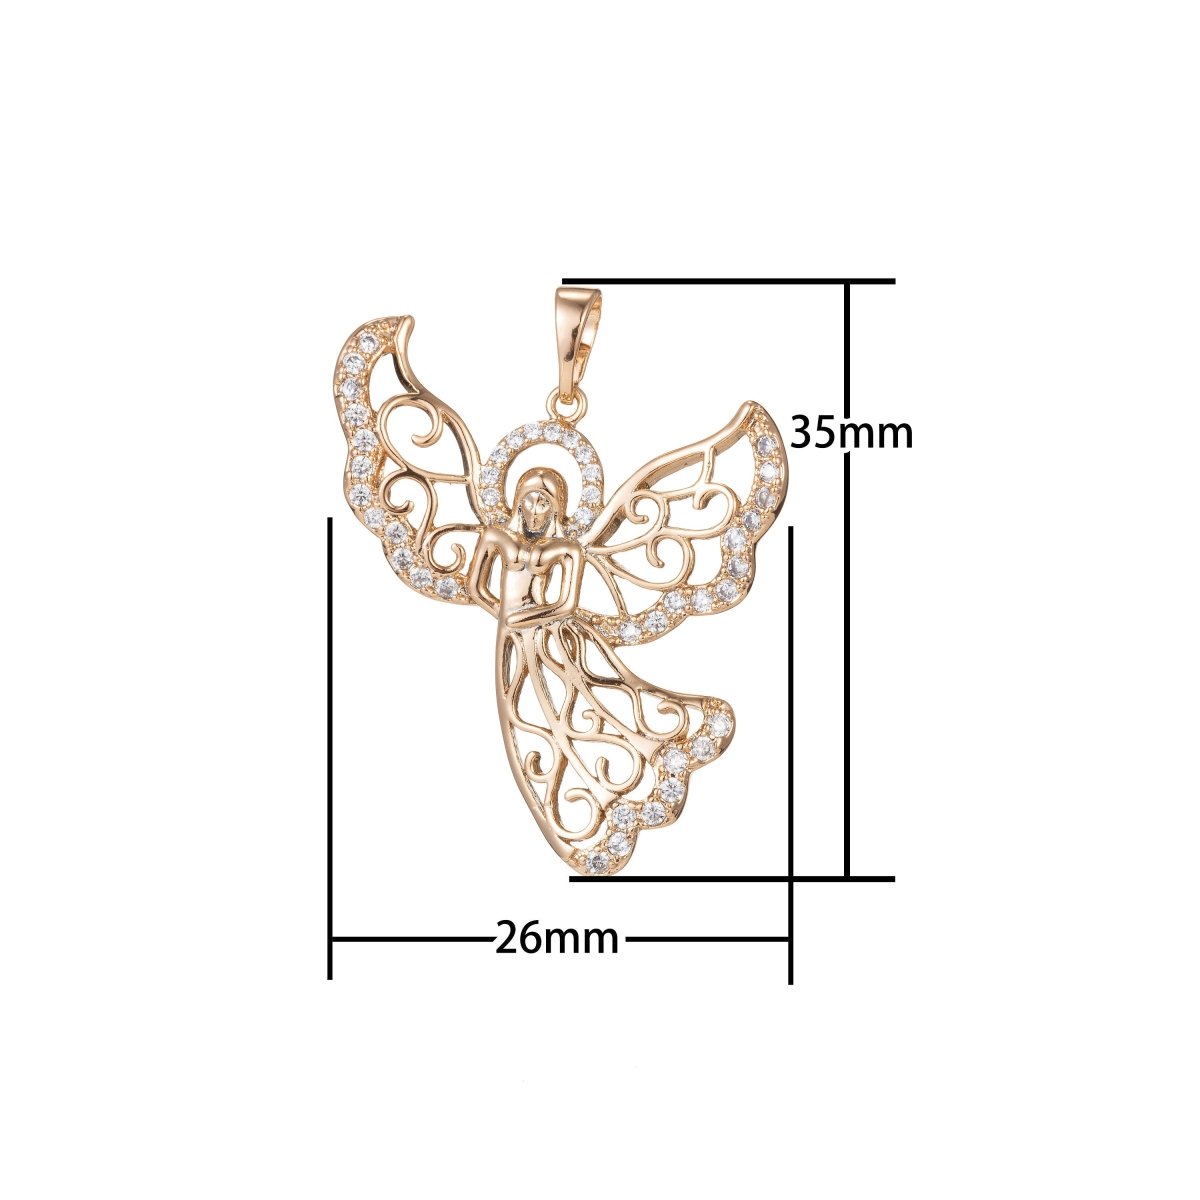 18k Gold Filled Micro Pave CZ Angel Pendant Charm, Micro Pave CZ Pendant Charm, Gold Filled Angel Pendant, For DIY Jewelry I-403 - DLUXCA